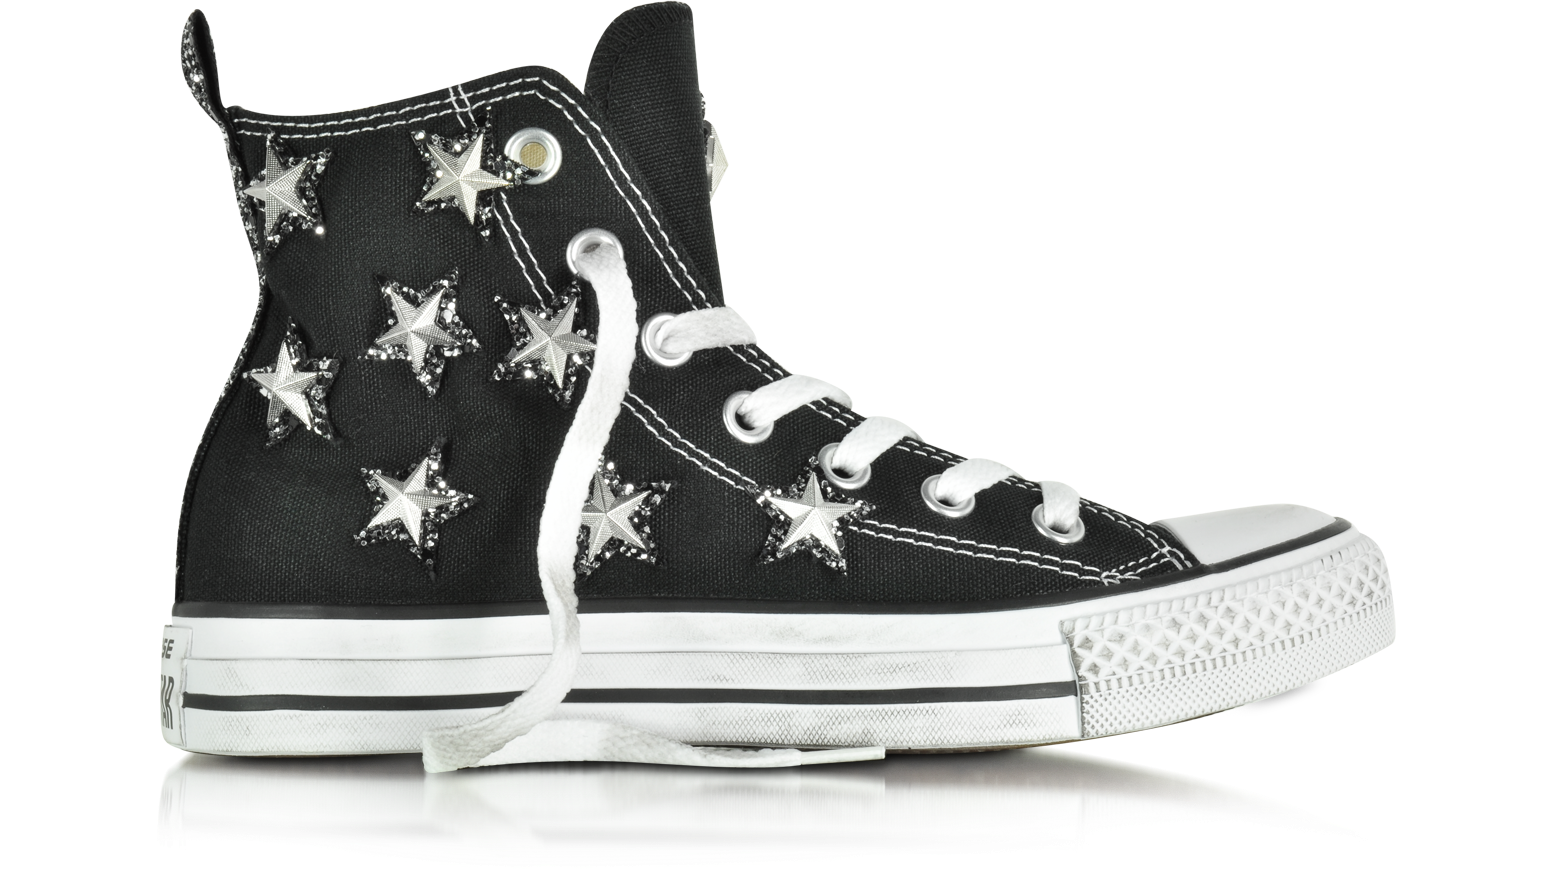 Converse Con Stelle Top Sellers, 50% OFF | lagence.tv ورق جدران ضد الماء